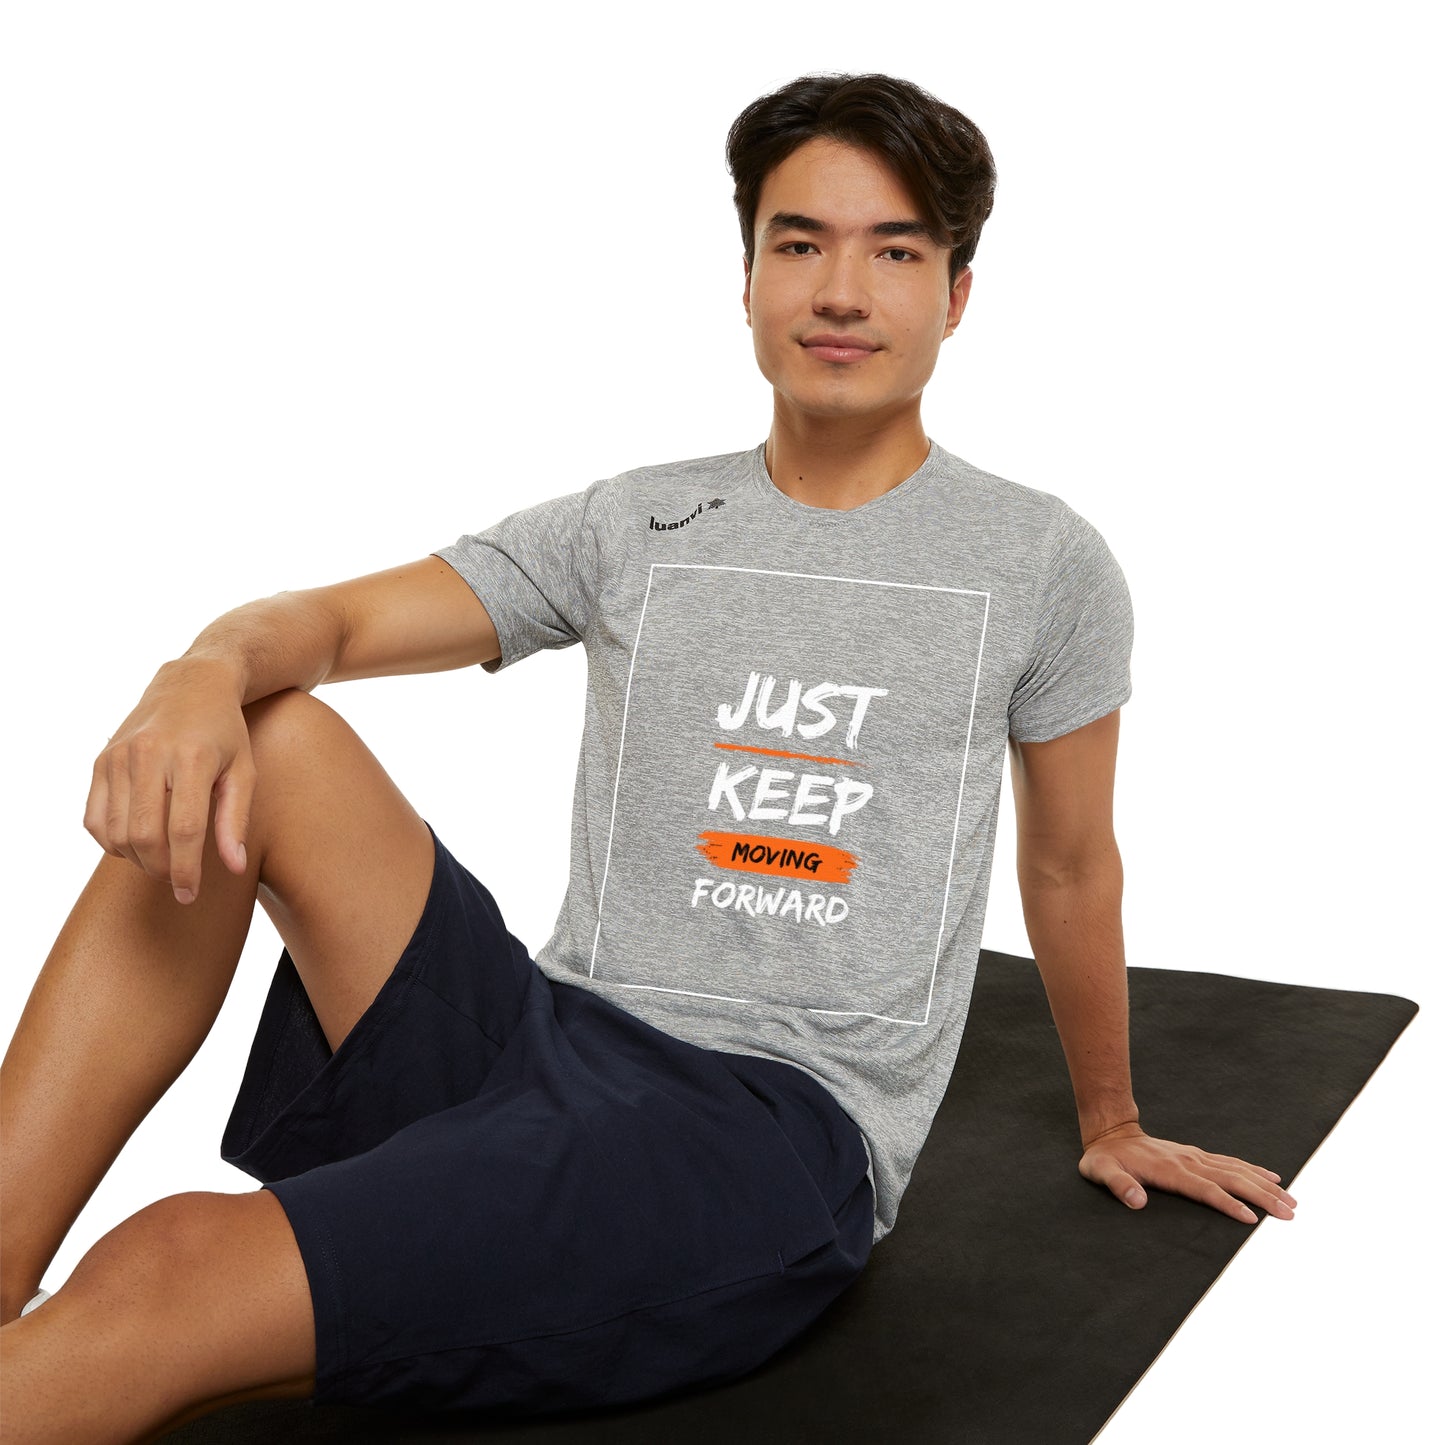 PoM's series Self Motivation ... Just Keep Moving (affirmation) - MEN's Sports T-shirt (skin breathing with Eco friendly print, 100% moisture-wicking polyester fabric)